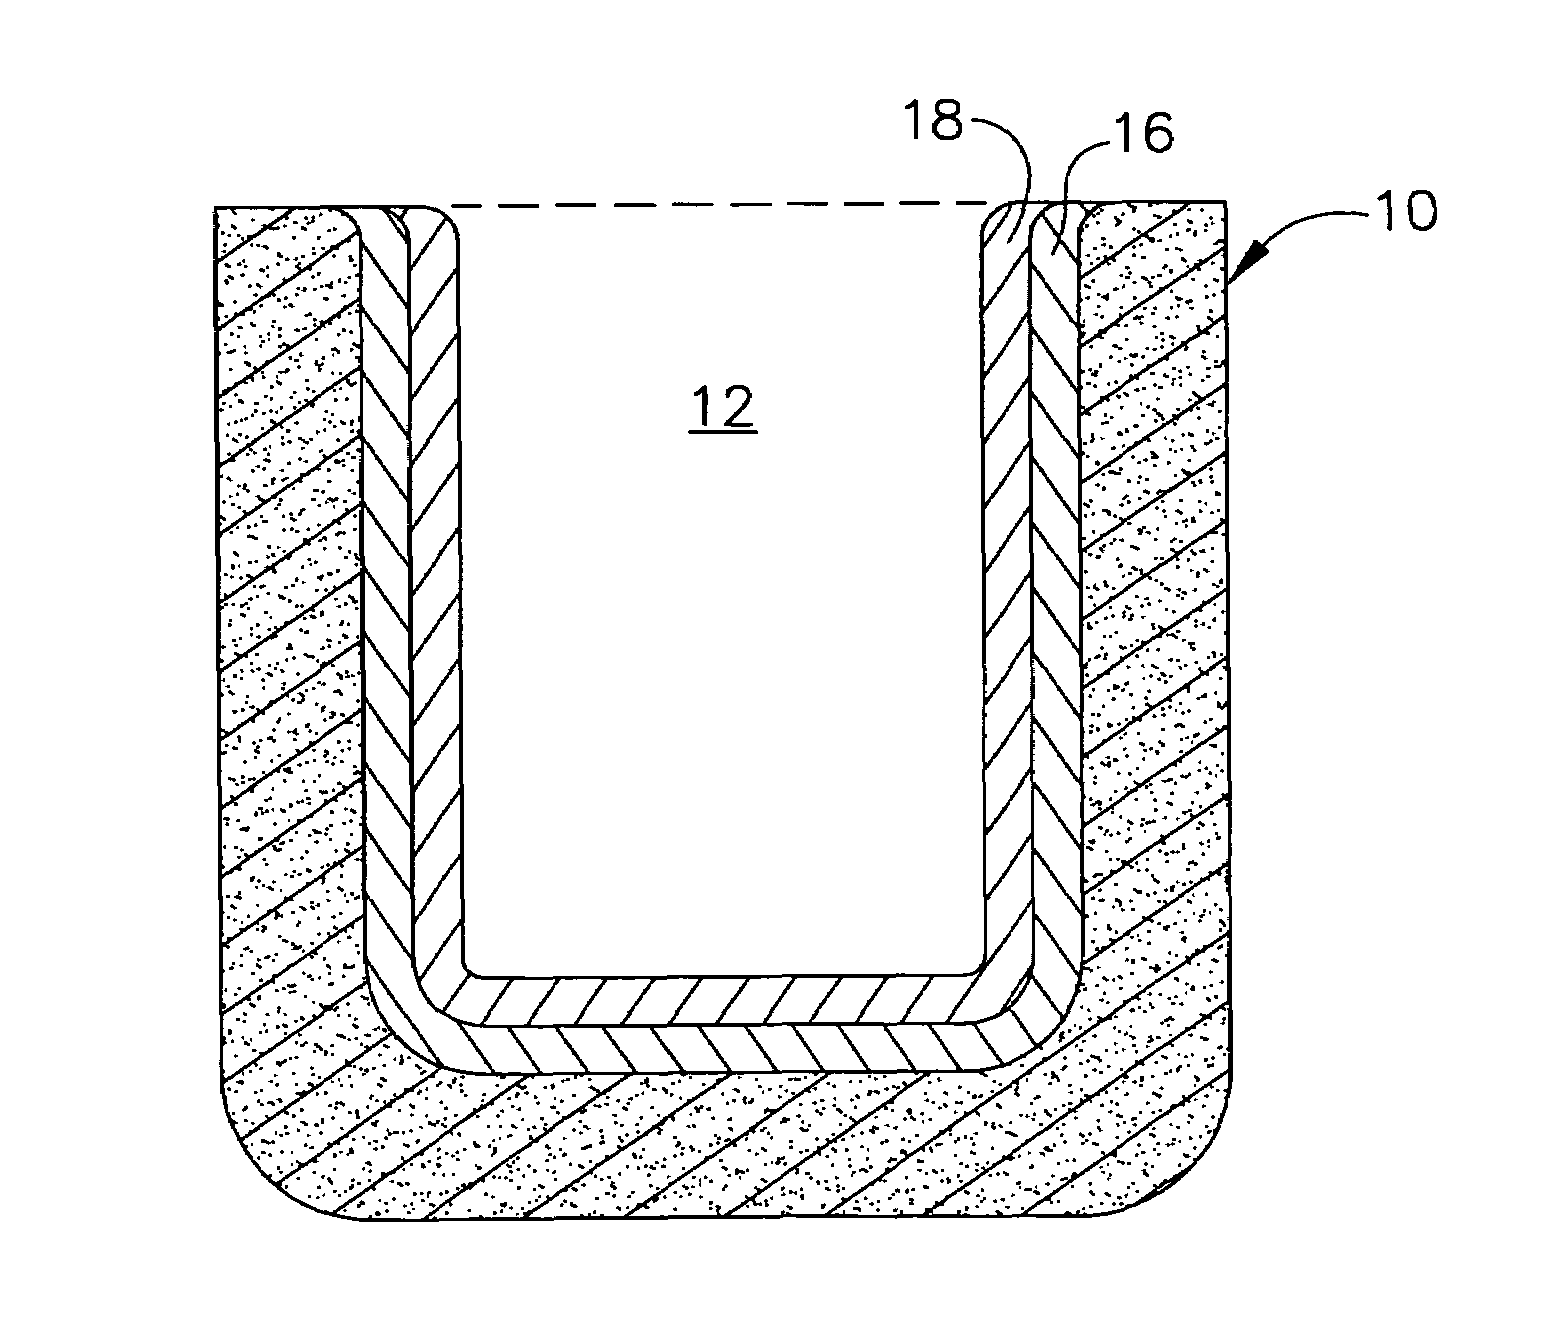 Methods for reducing carbon contamination when melting highly reactive alloys